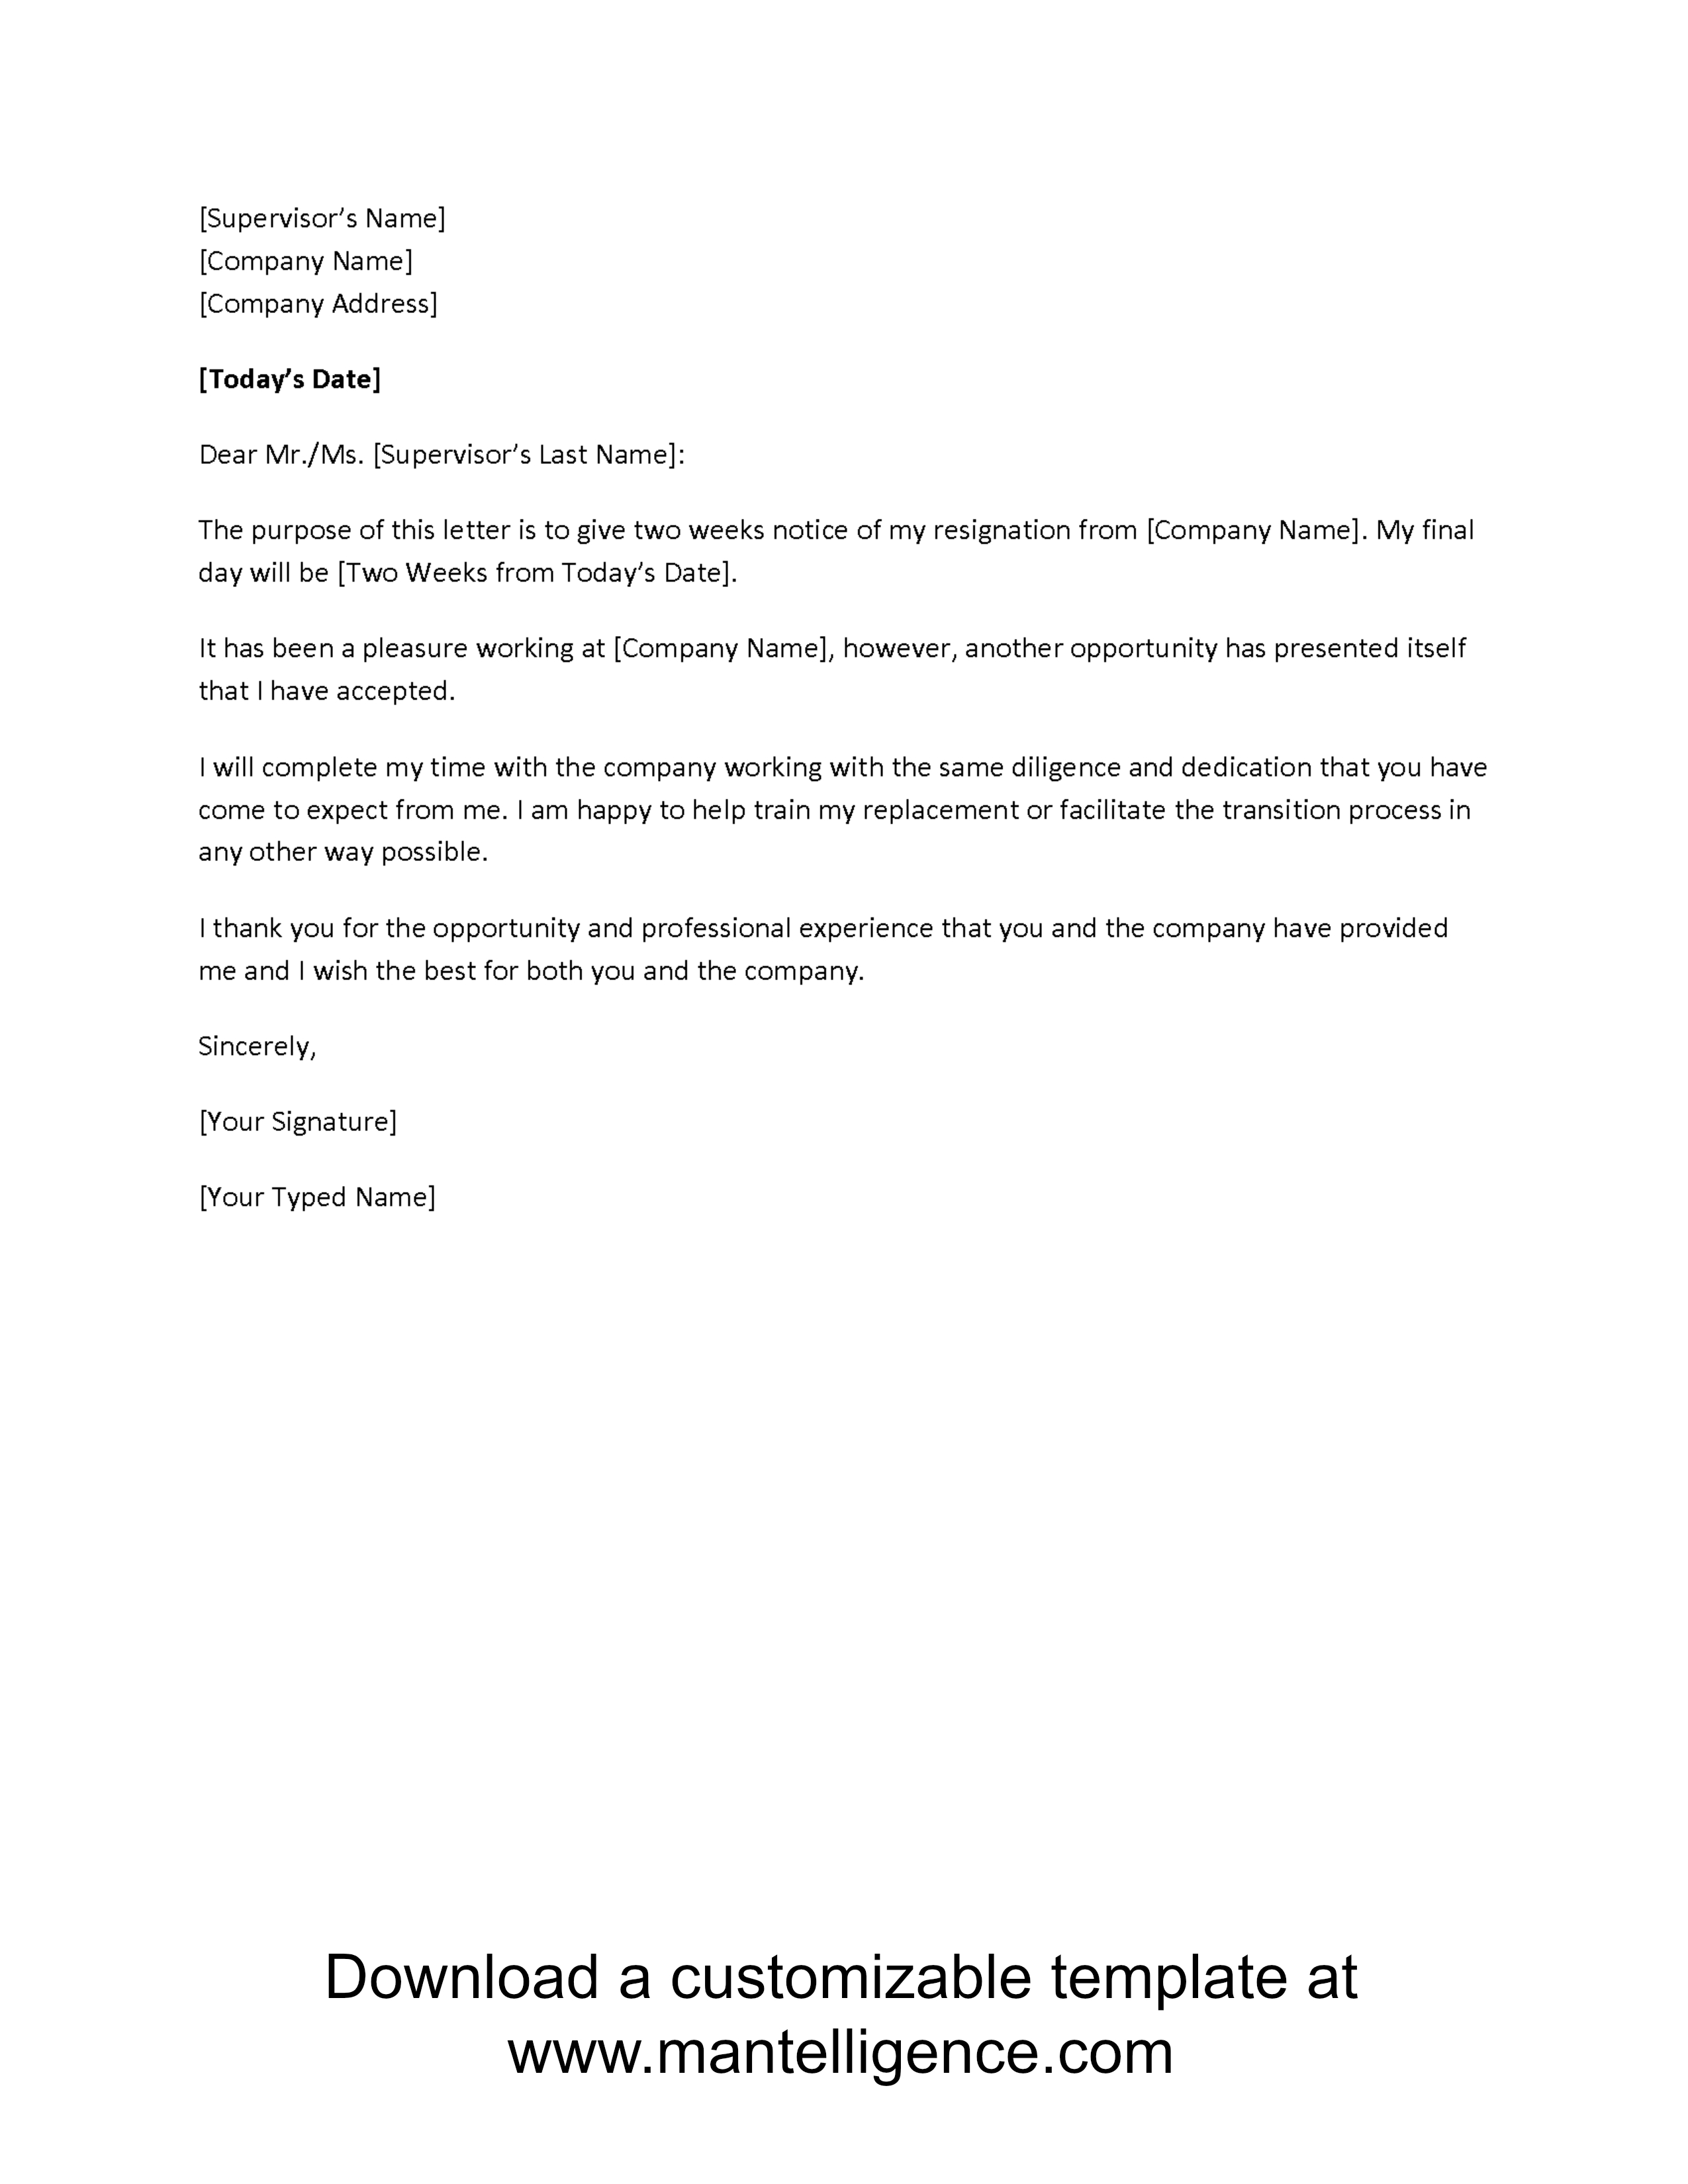 Resignation Letter Template Free - 3 Highly Professional Two Weeks Notice Letter Templates